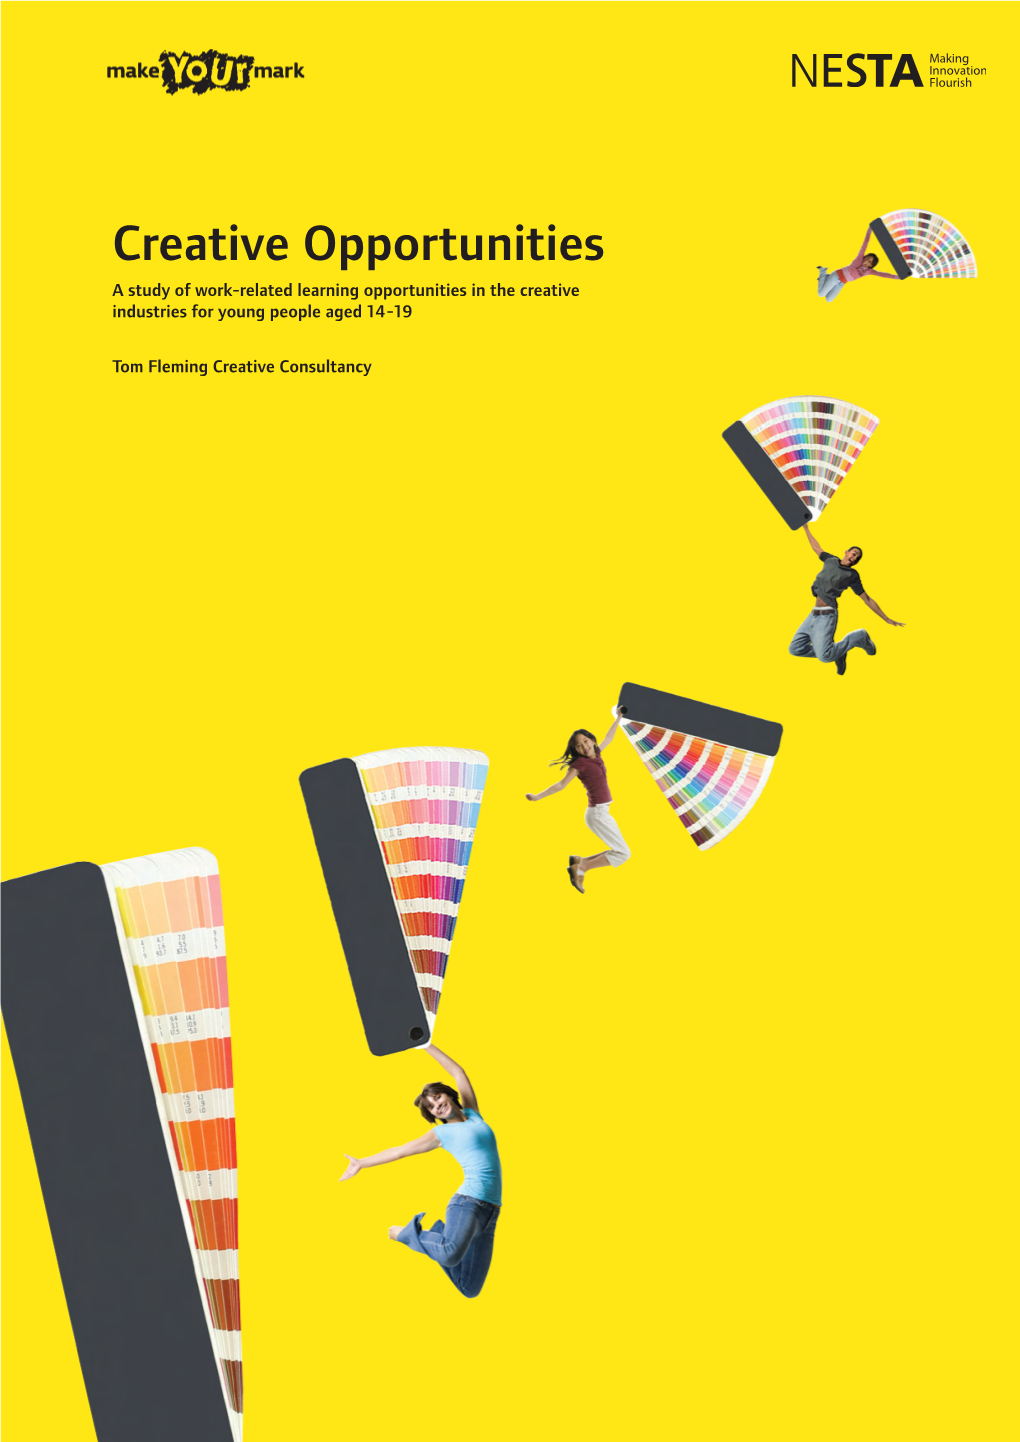 Creative Opportunities a Study of Work-Related Learning Opportunities in the Creative Industries for Young People Aged 14-19